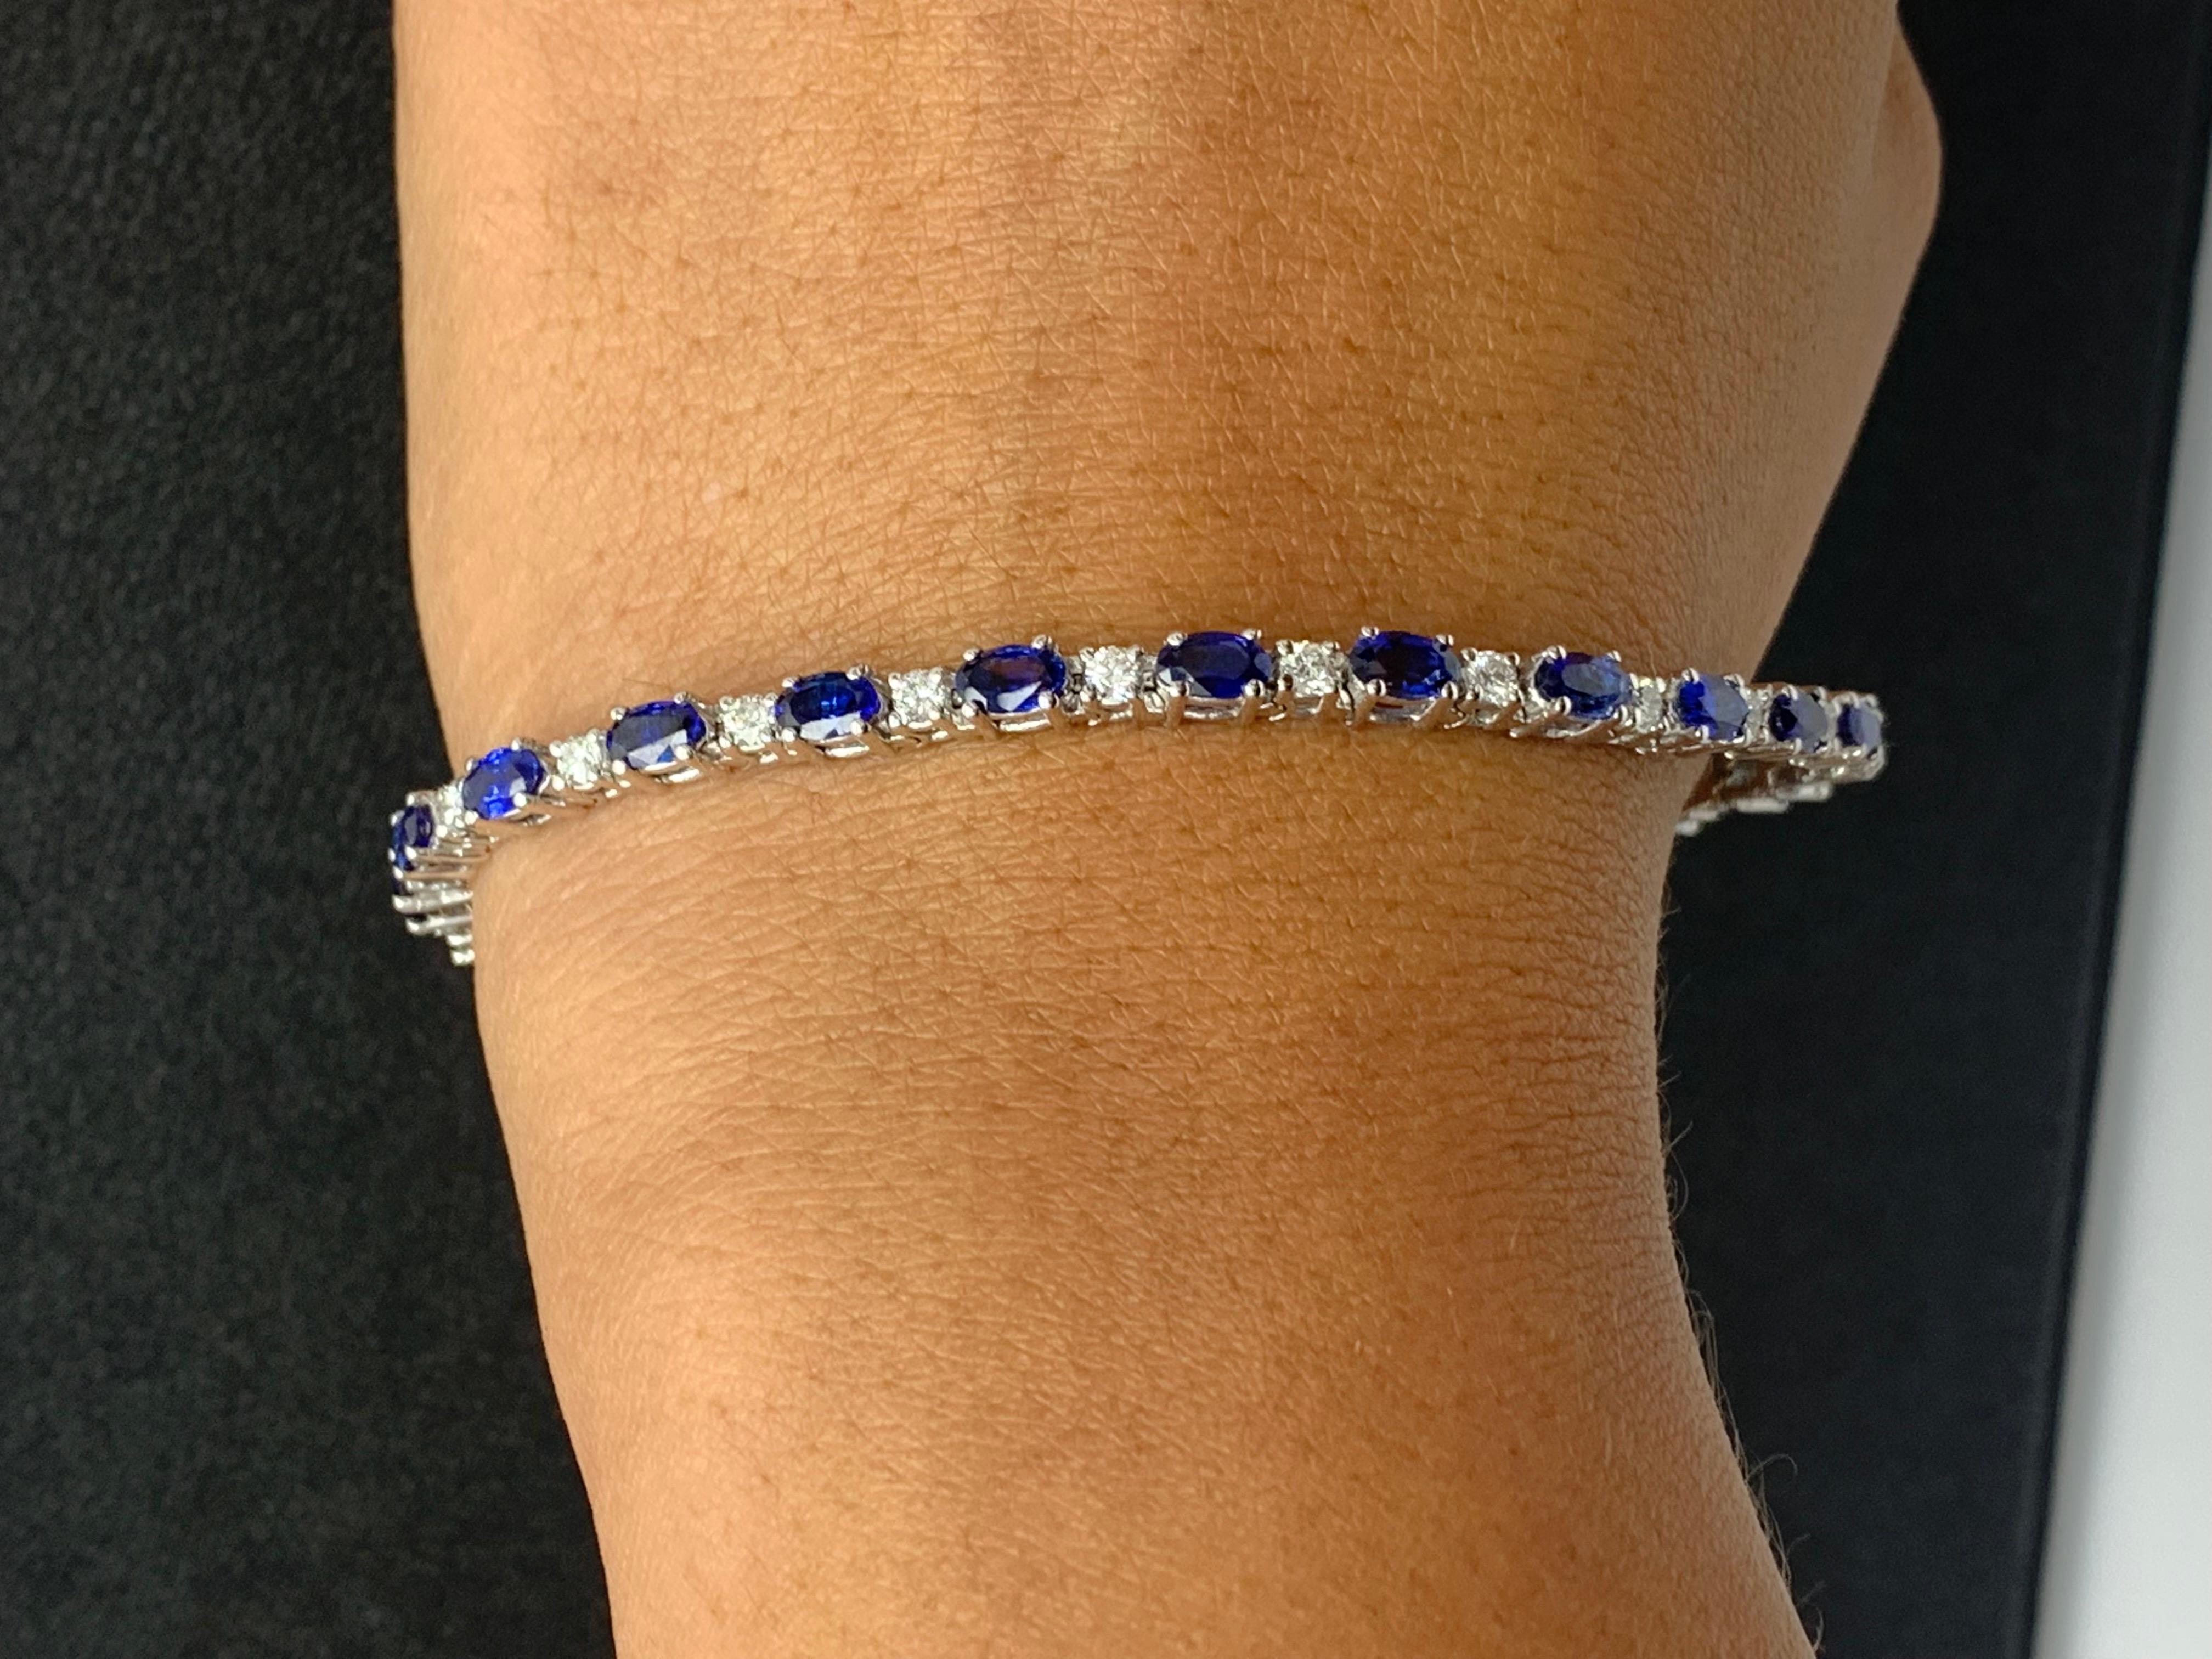 6.01 Carat Blue Sapphire and Diamond Tennis Bracelet in 14K White Gold For Sale 5